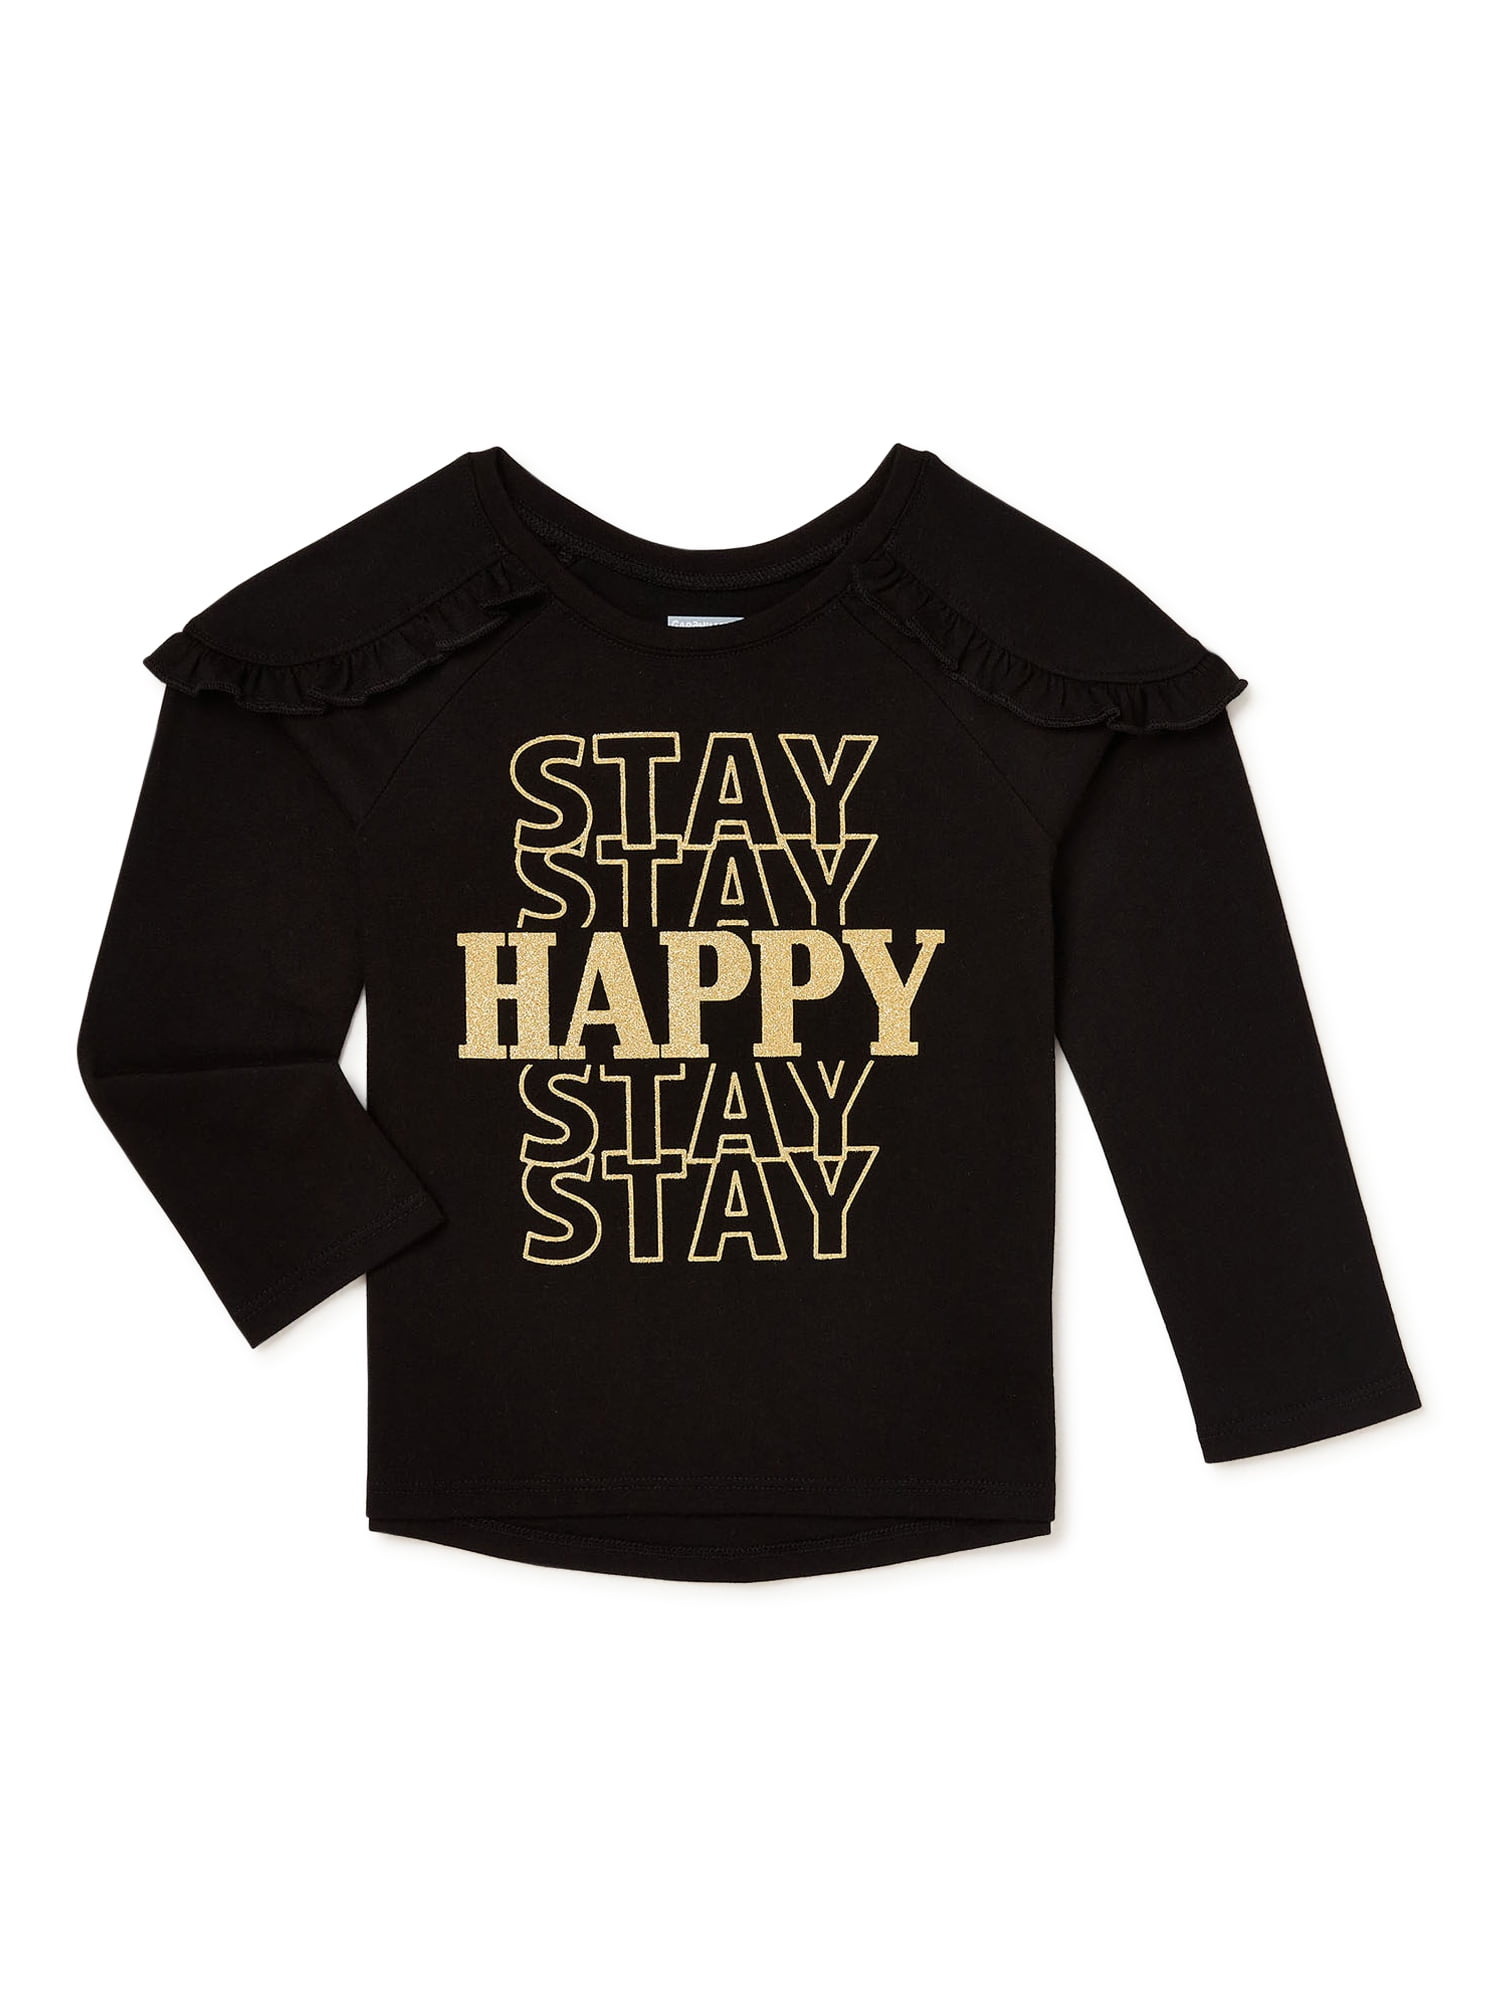 Details about   Garanimals Baby Toddler Girl Long Sleeve Shine Like A Star HI-LO Graphic Tee 5T 